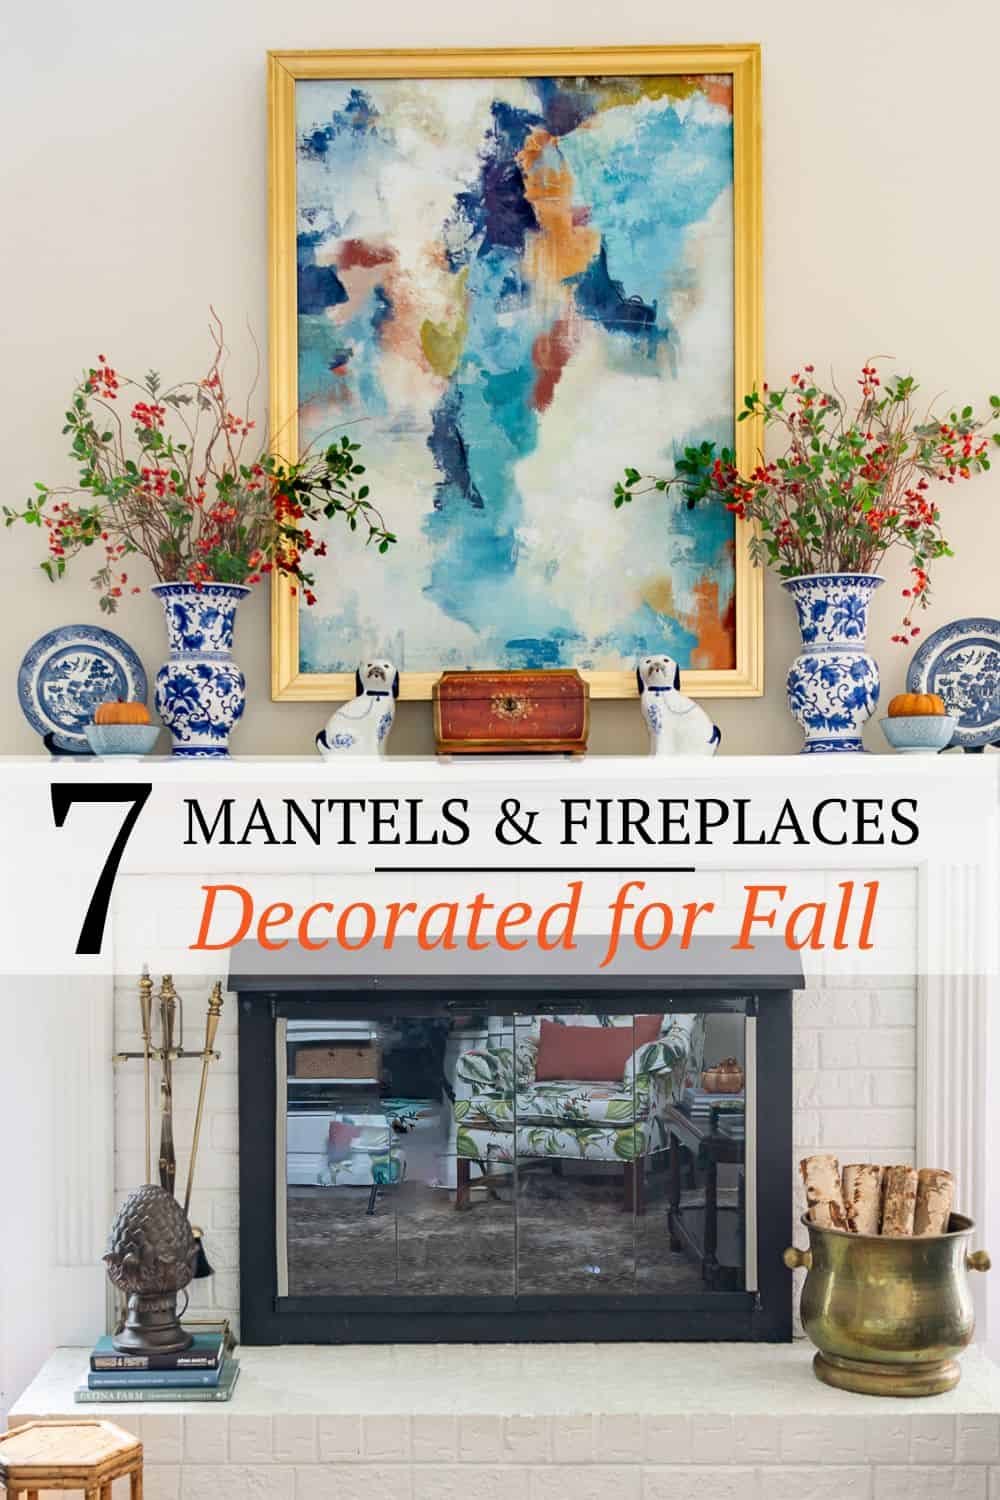 Pinterest graphic for mantel decorating ideas for fall